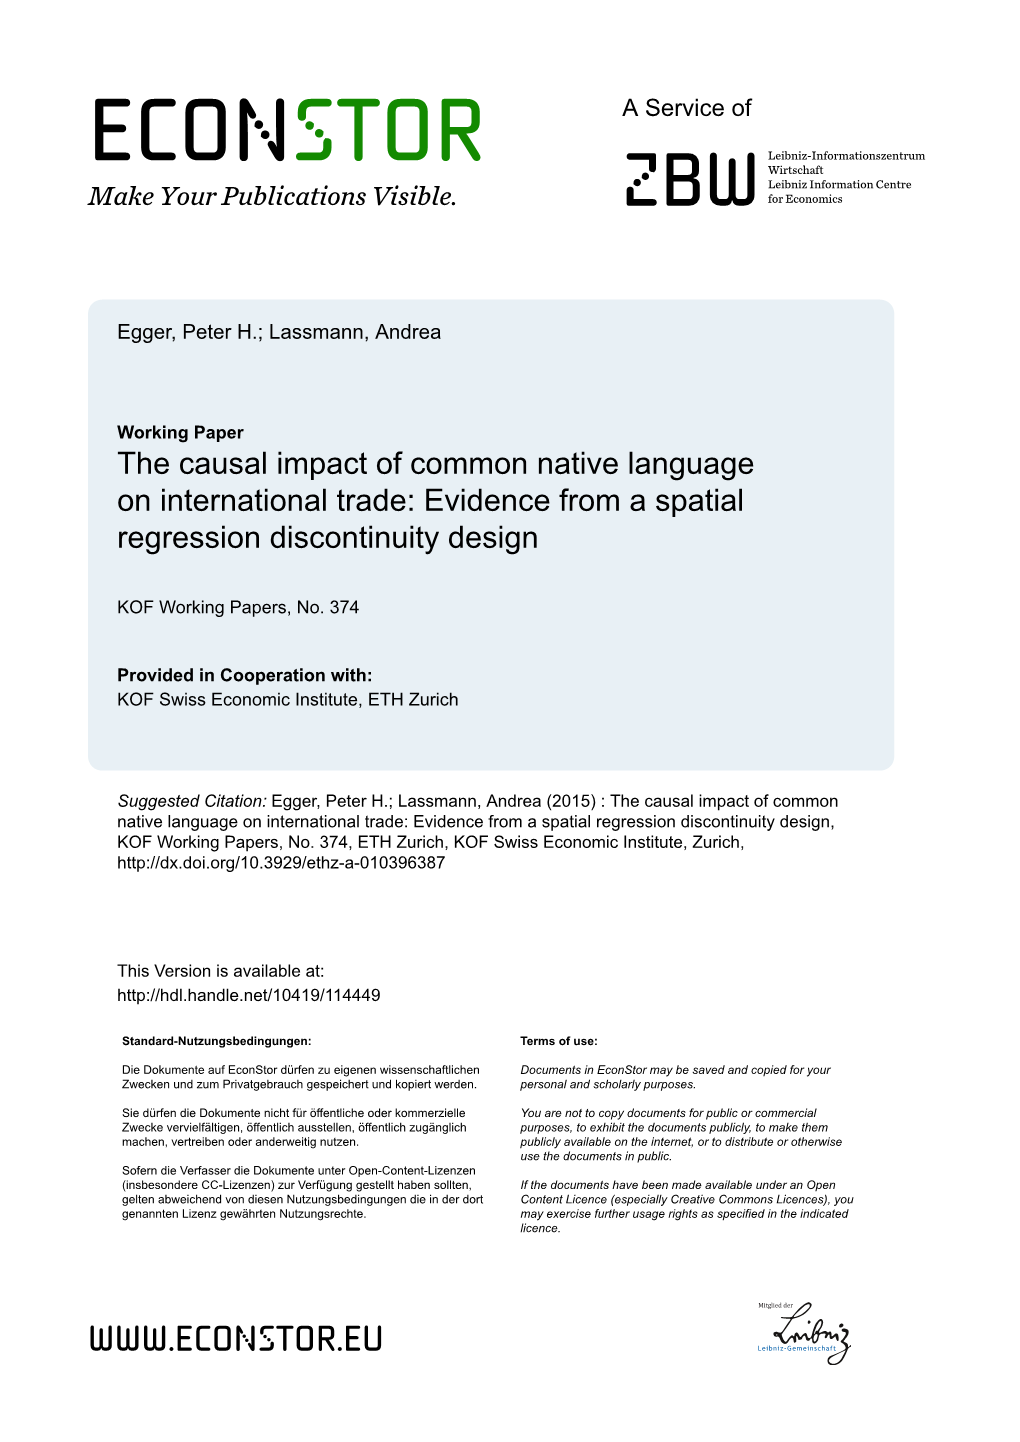 The Causal Impact of Common Native Language on International Trade: Evidence from a Spatial Regression Discontinuity Design